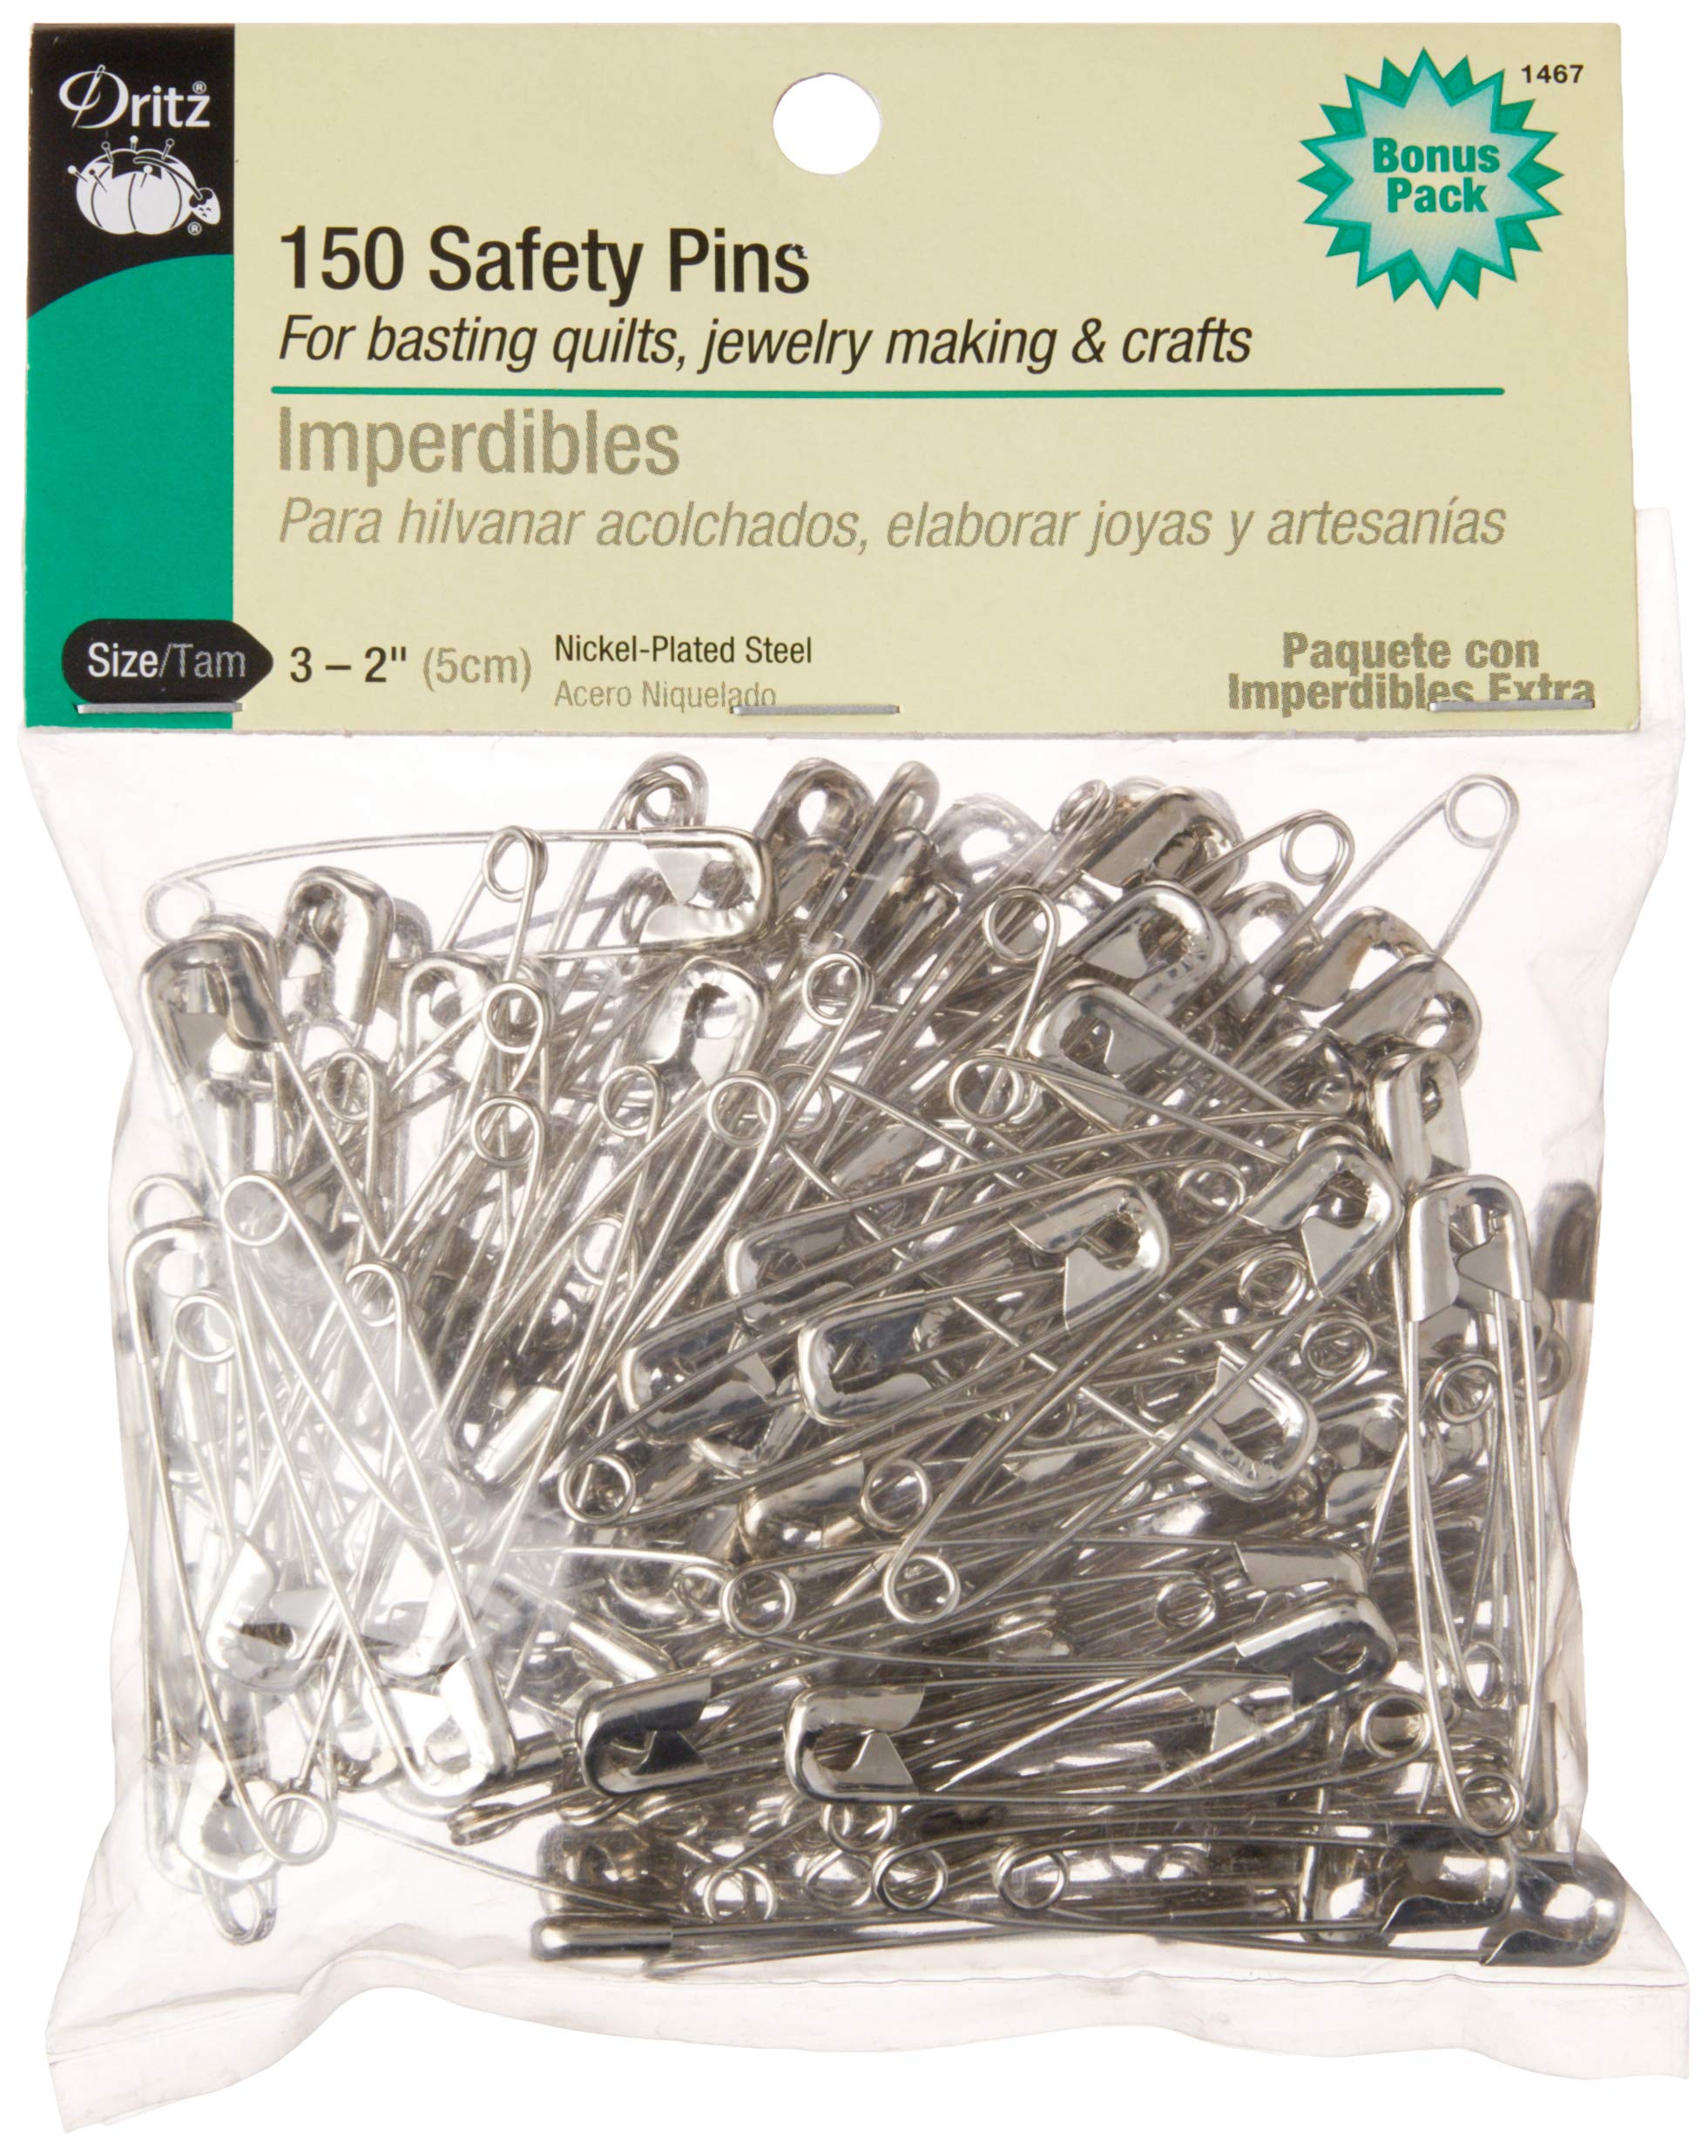 Dritz 1467 Safety Pins Size 3 (150-Count) Size 3 150-Count